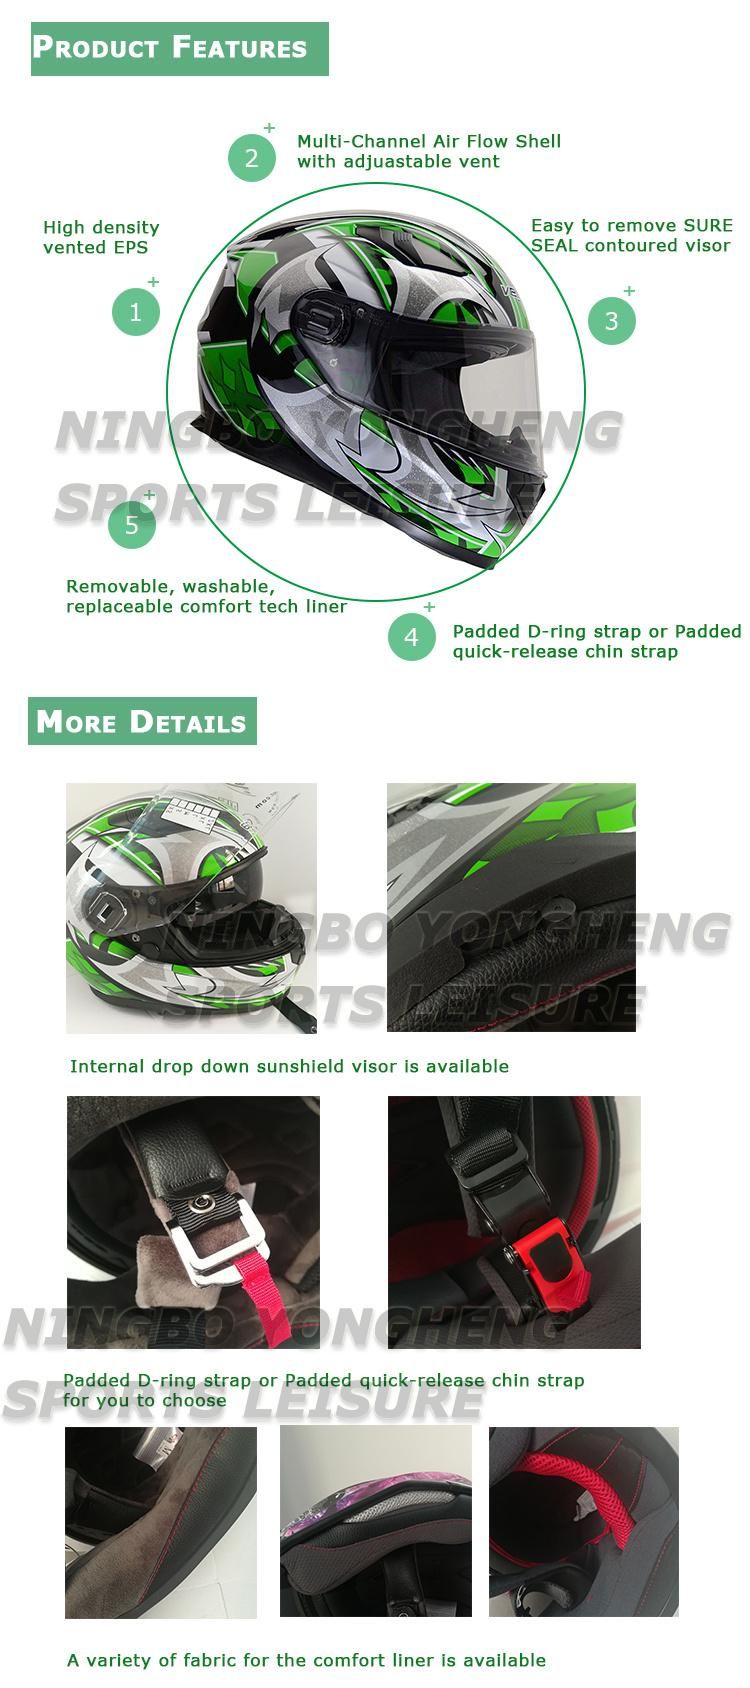 New Graphic ABS Motorcycle Helmet with DOT Certification